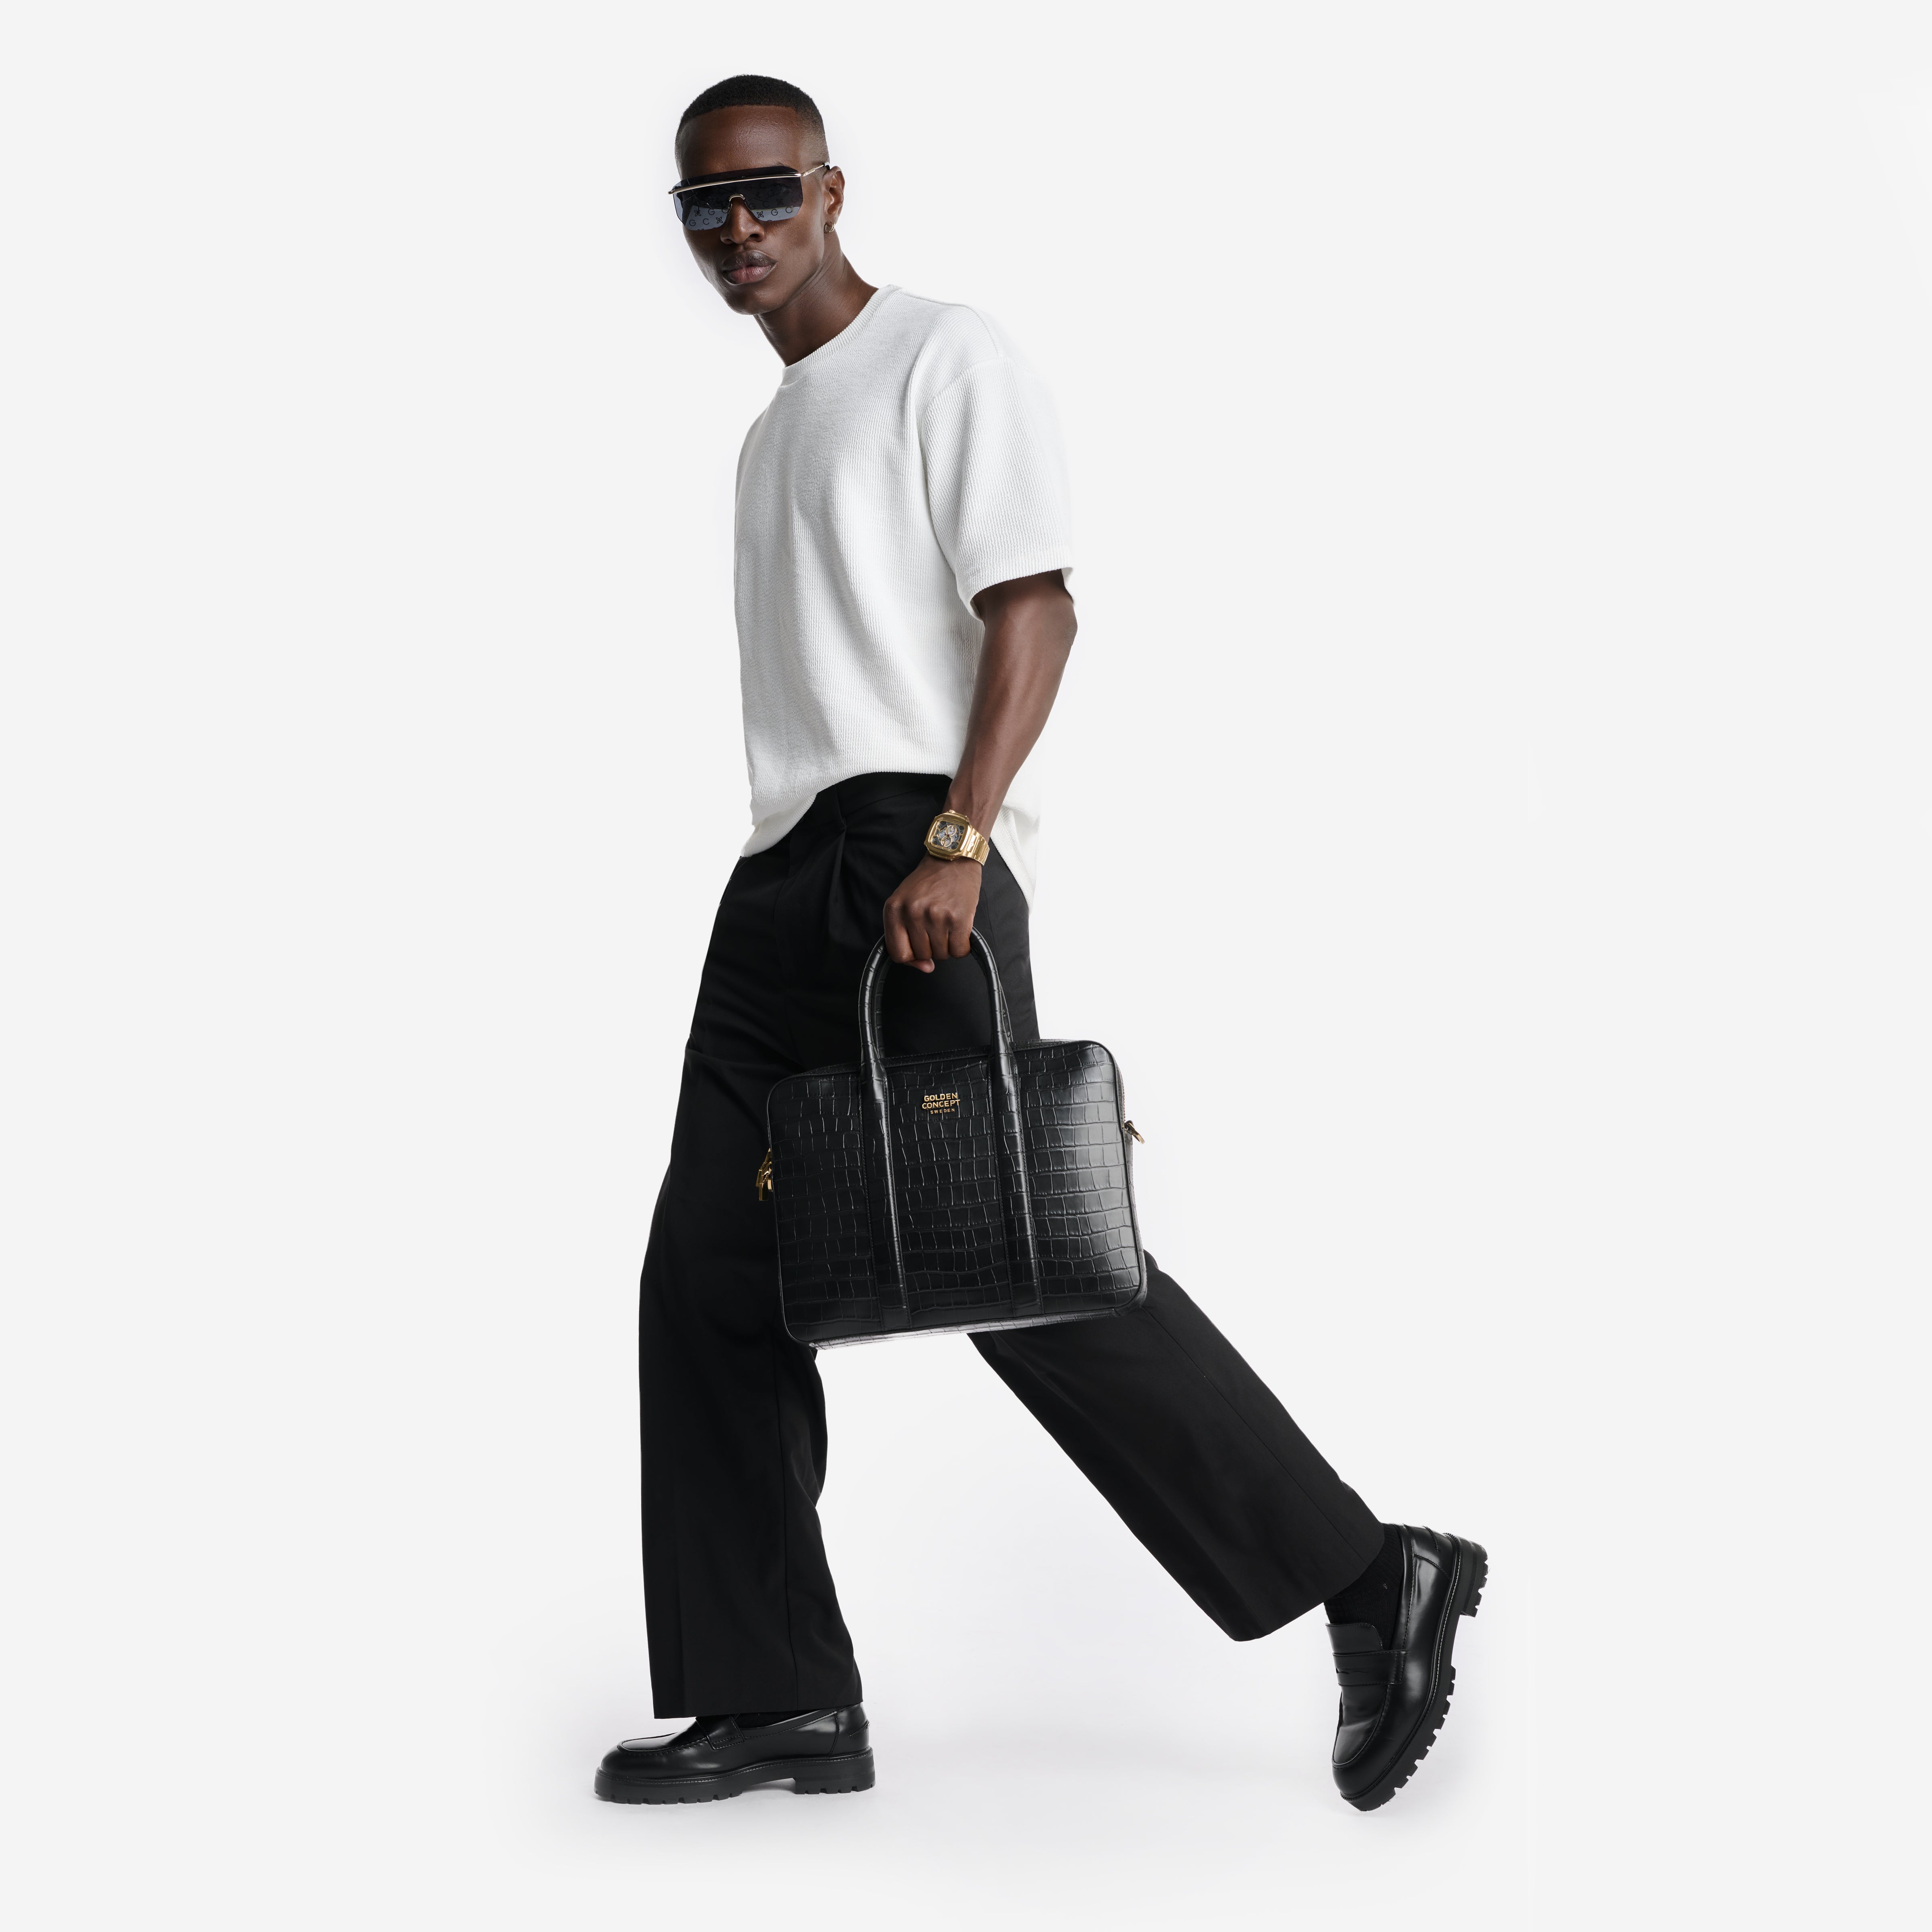 Golden Concept - Leather Bags - Briefcase (Croco Embossed)